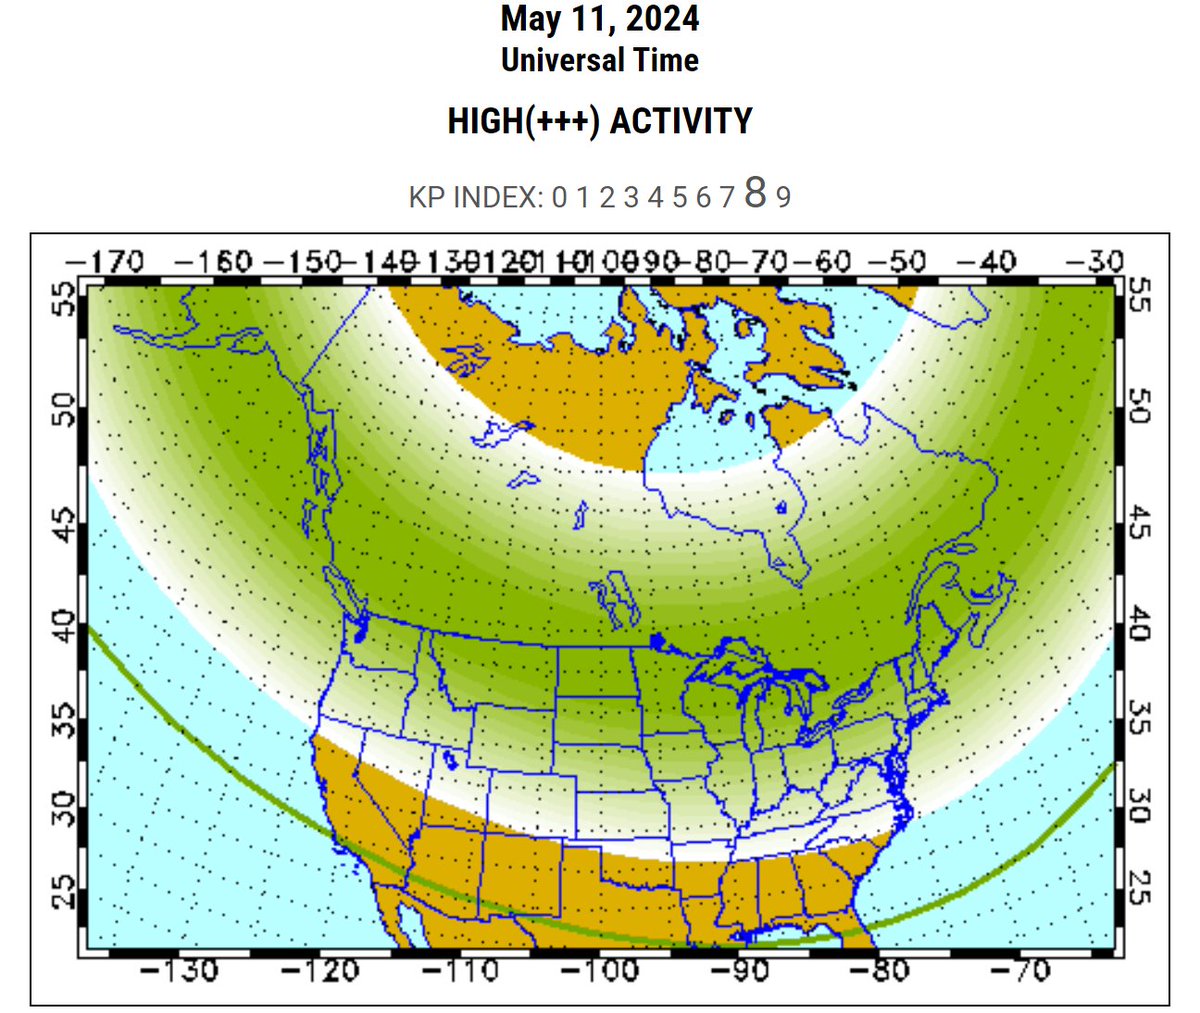 This could be our best chance to see the #aurora in a long time. We had a similar event back in March, but it peaked during the day here in North America, and we didn't get to see anything. This one should peak at night, which would be perfect for viewing. It's worth a look from…